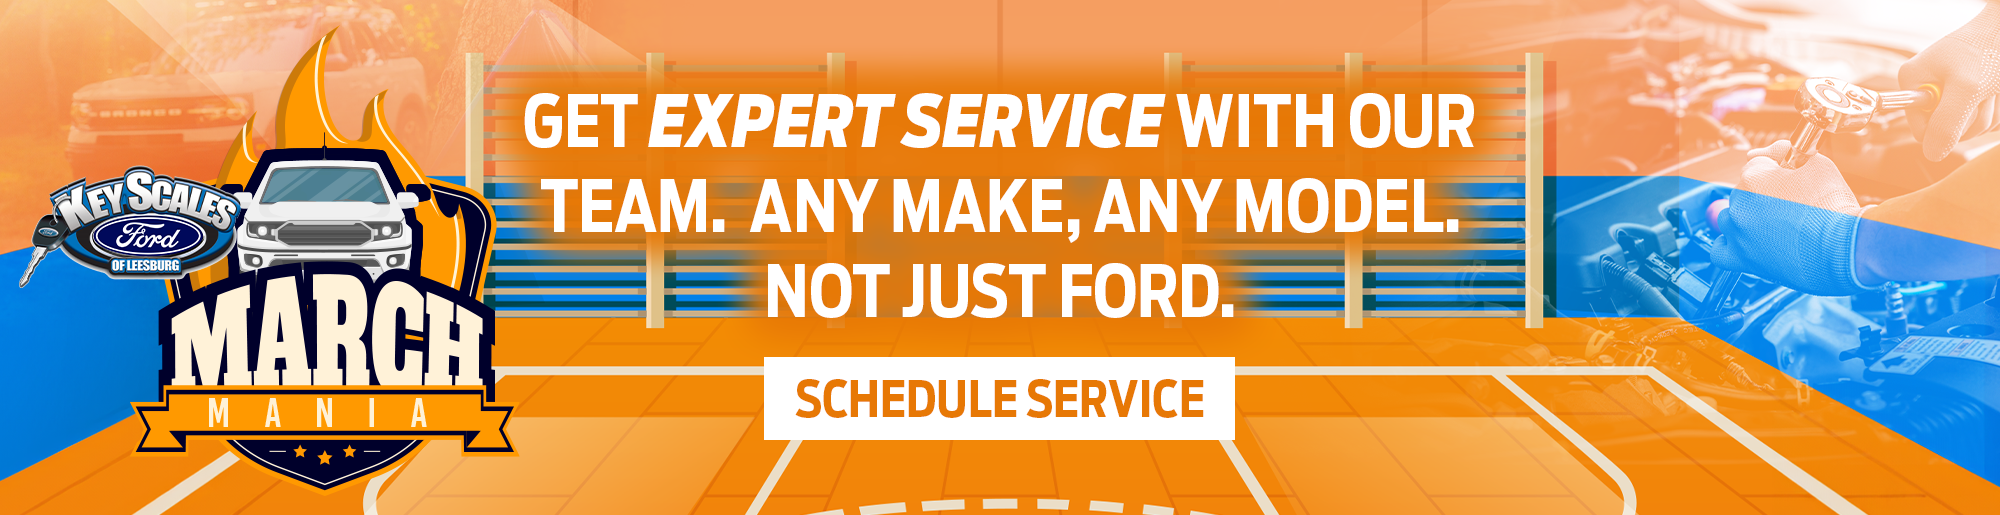 Get Expert Service with Our team. Any Make, Any Model. 